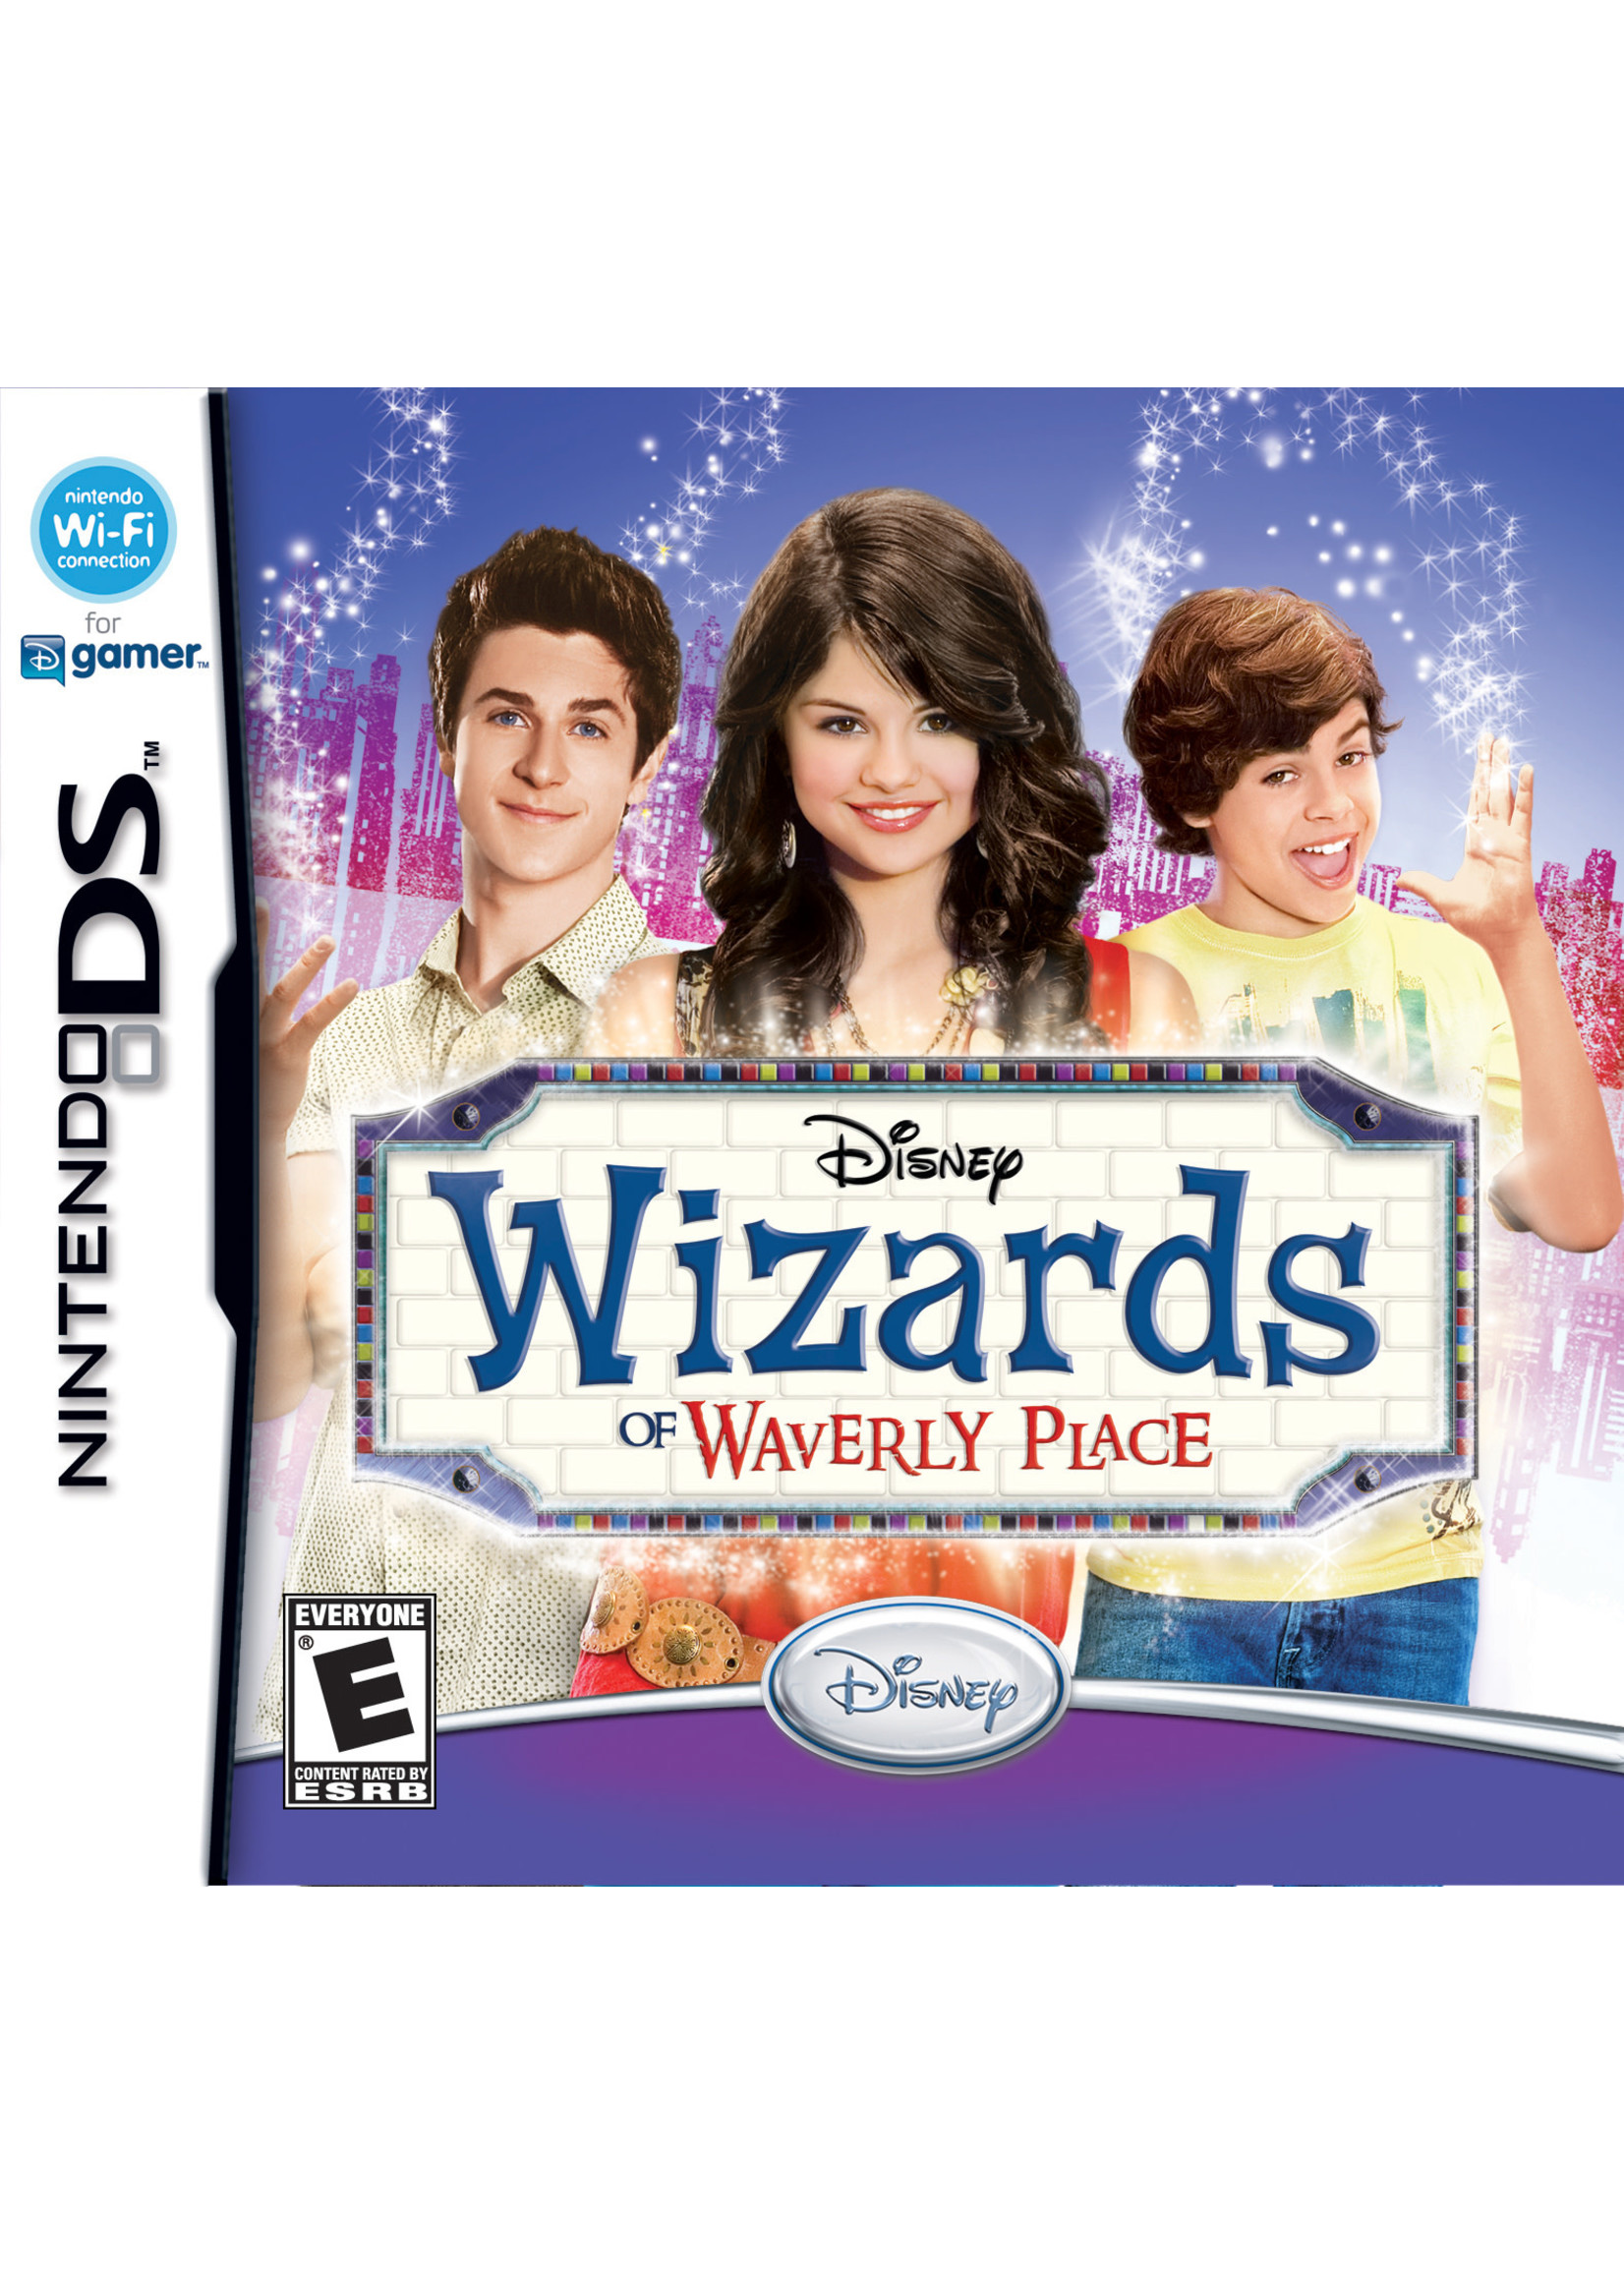 Nintendo DS Wizards of Waverly Place - Cart Only